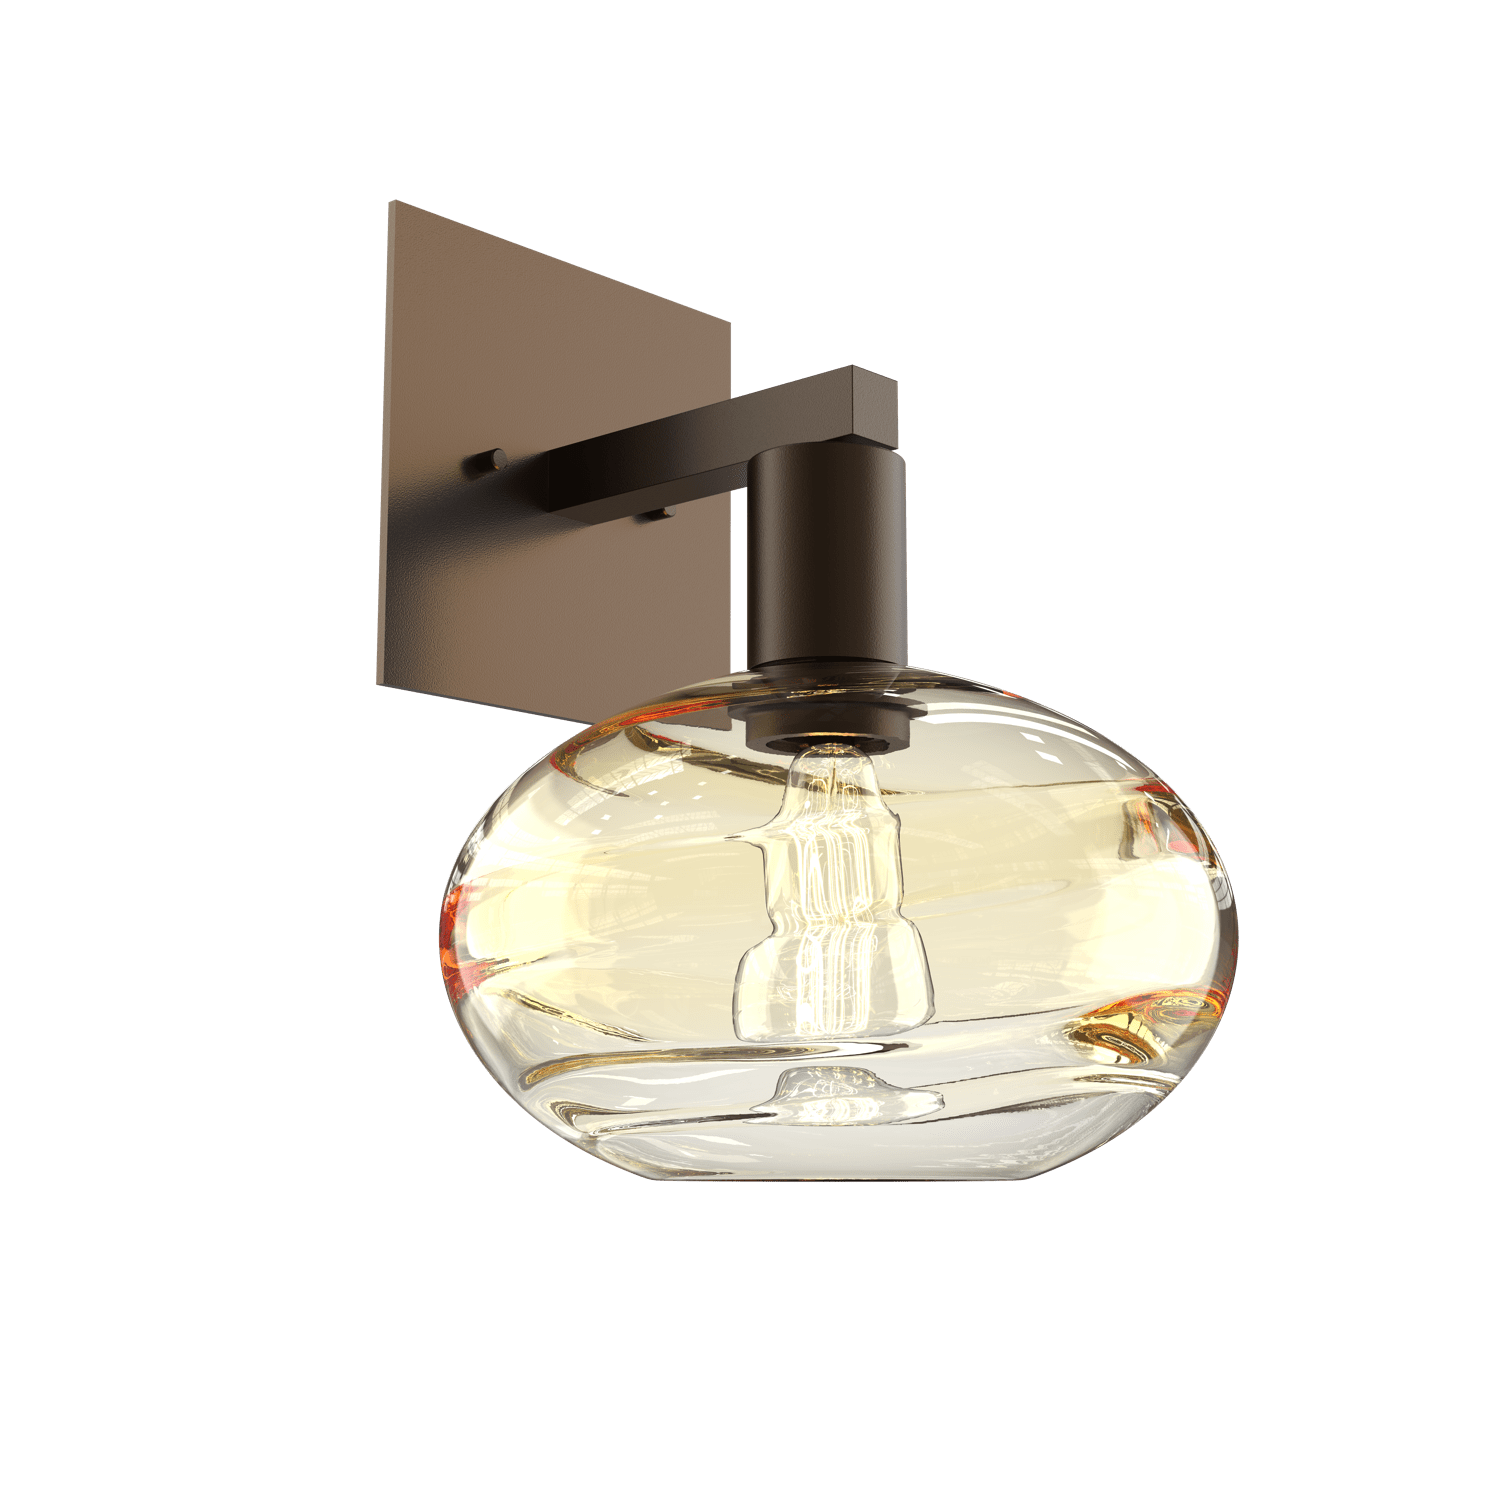 IDB0036-11-FB-OA-Hammerton-Studio-Optic-Blown-Glass-Coppa-wall-sconce-with-flat-bronze-finish-and-optic-amber-blown-glass-shades-and-incandescent-lamping